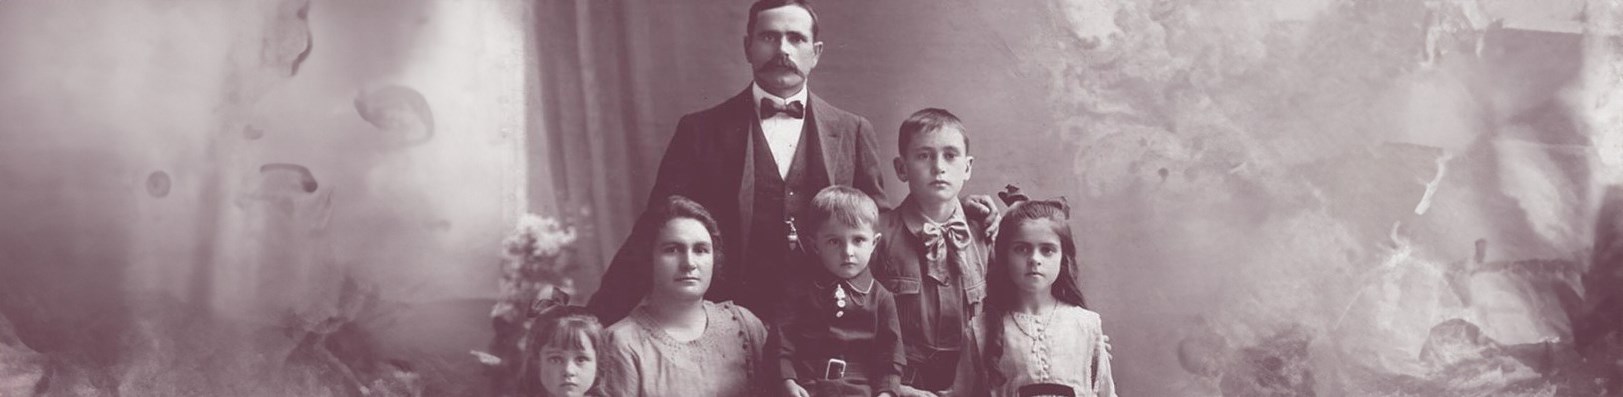 An old black and white photo of a family.